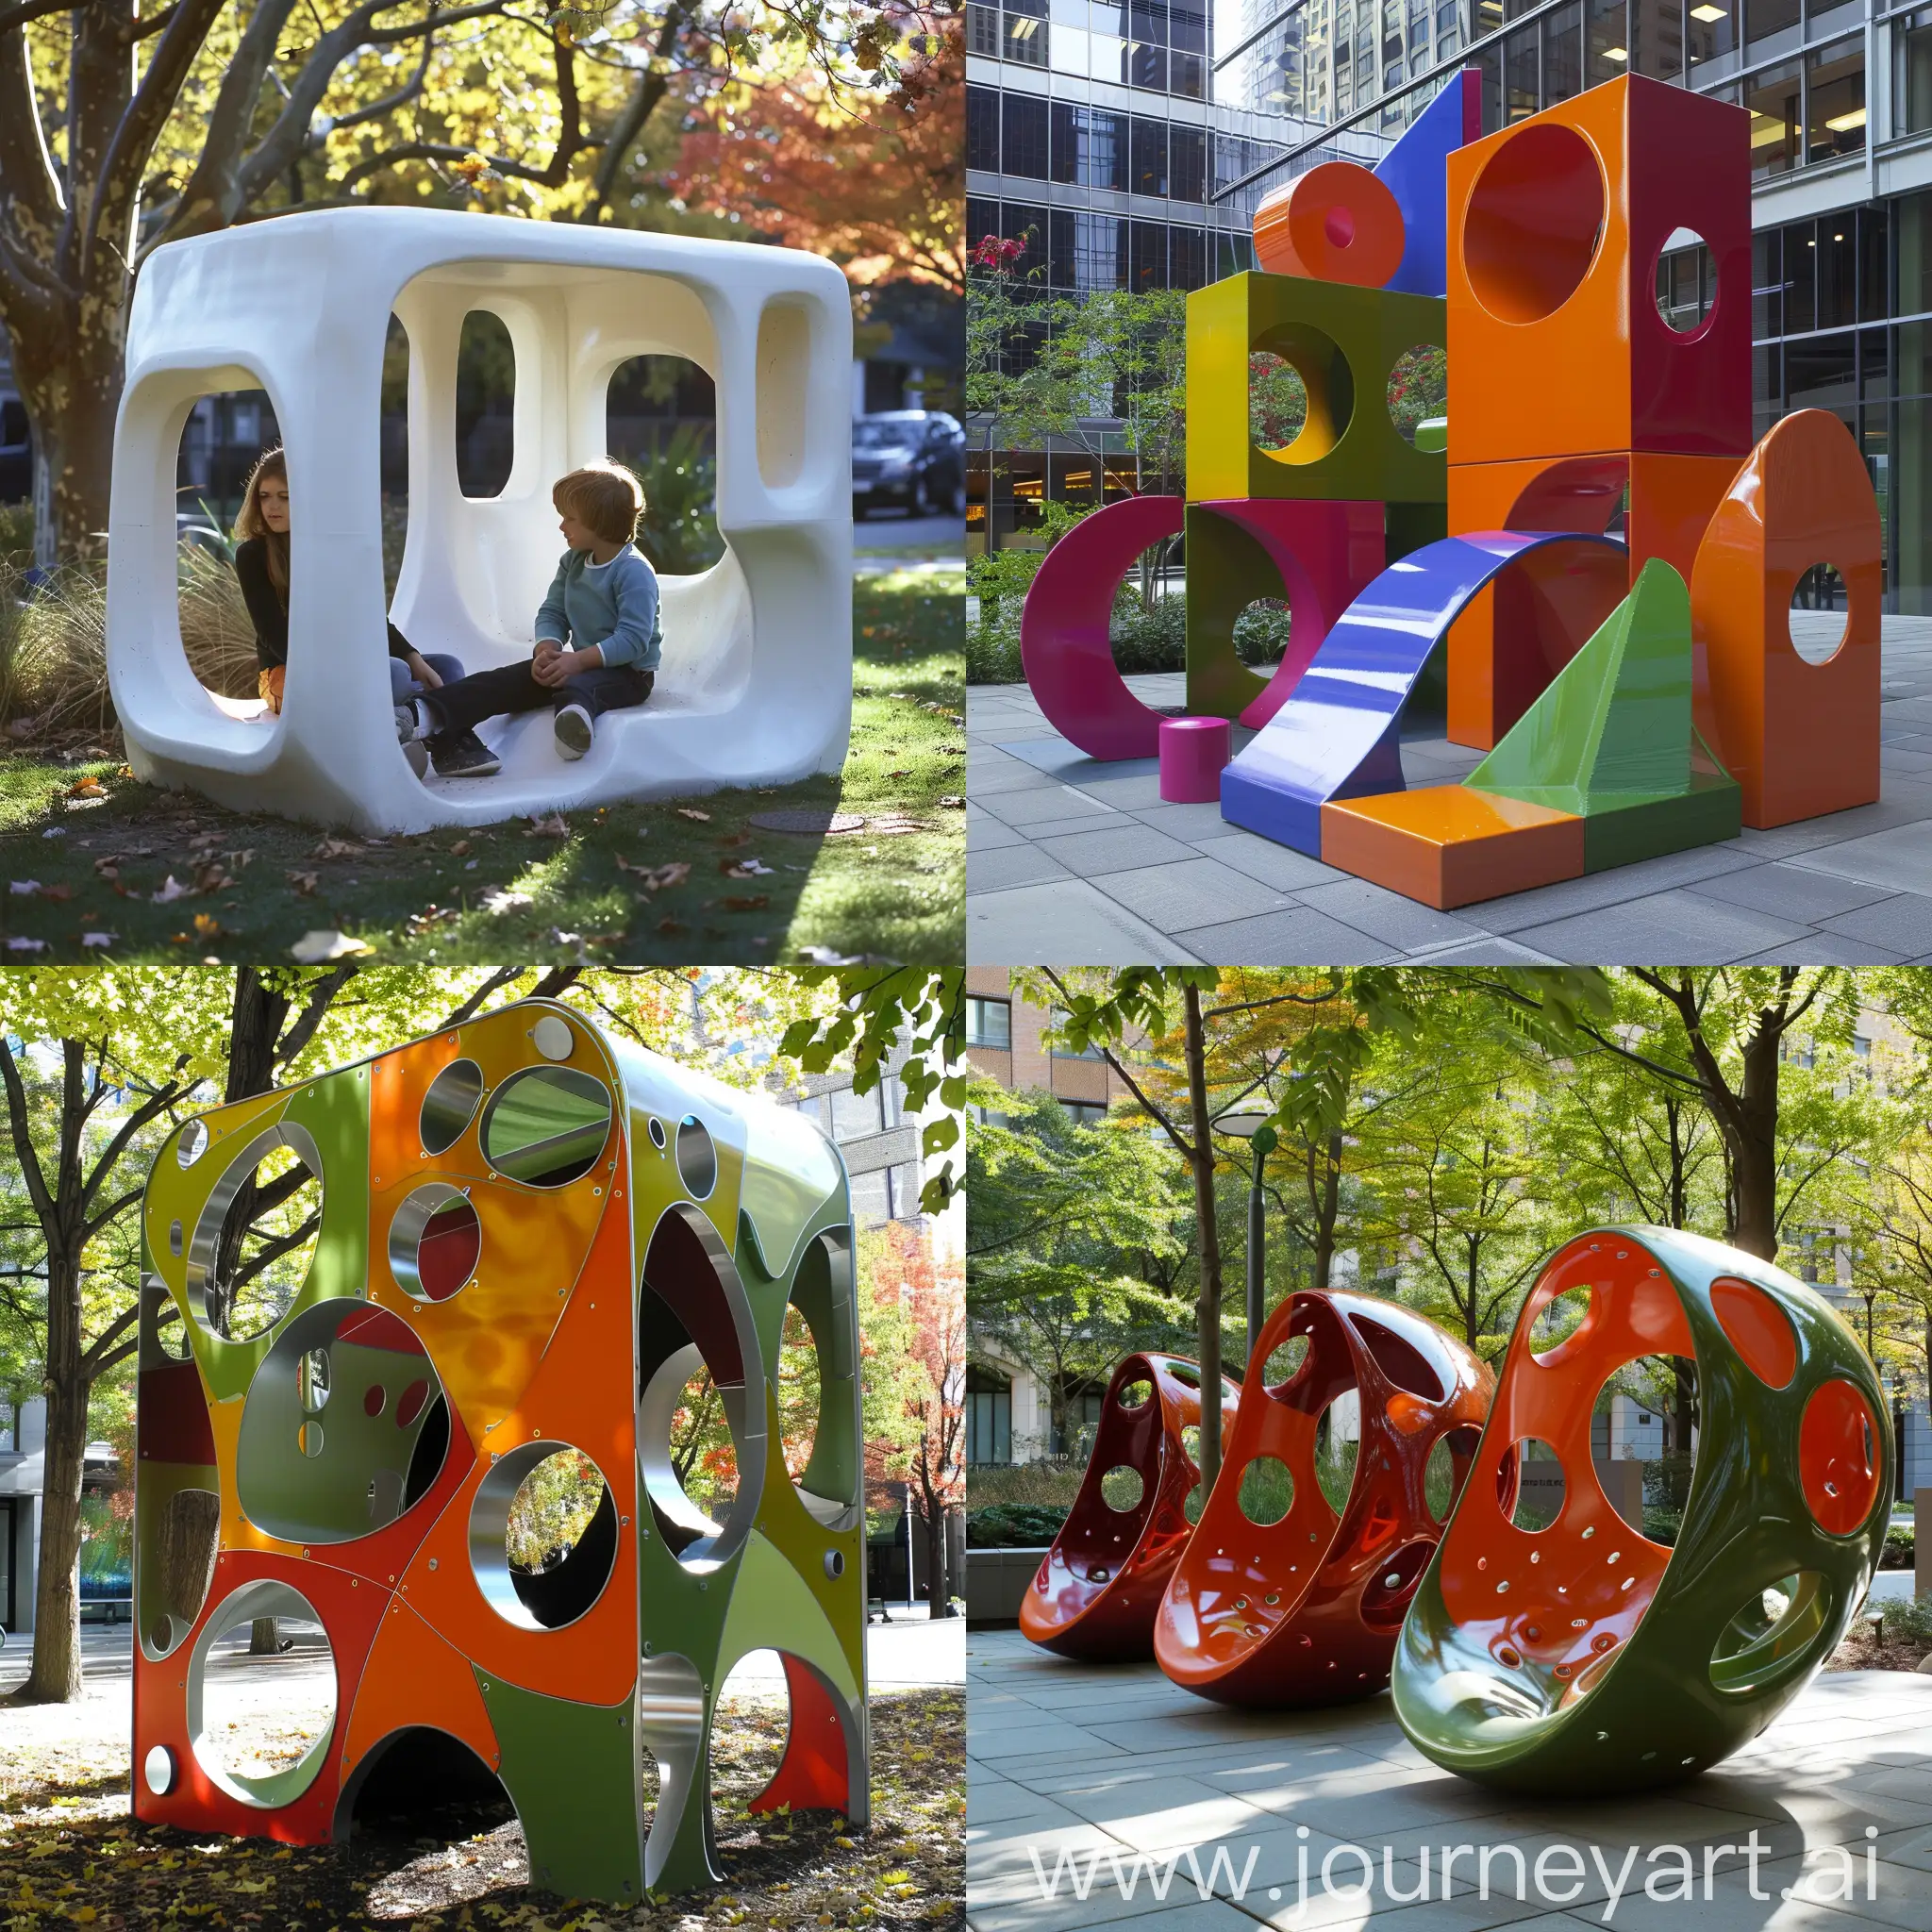 Minimal Multi-functional Urban Play Sculptures .Concept:Sculptures that serve as play areas for children while being aesthetically pleasing urban art. Sources of Inspiration:Isamu Noguchi's Play Sculptures and Tracey Emin's The Doors.
Form & Shape: Playful, abstract forms.
Structure: Safe, non-toxic materials.
Dimensions: Large enough for climbing and playing.
Material: Recycled rubber, metal, and plastic.
Color: Bright, engaging colors.
Features: Climbing structures, slides, interactive elements.
Location: Urban parks, community centers.
Design Style: Playful, functional, abstract.
Design playful, abstract urban sculptures that double as play areas for children. Use safe, non-toxic materials like recycled rubber, metal, and plastic. Incorporate climbing structures, slides, and interactive elements within a large, engaging form. The sculptures should be brightly colored and visually appealing, suitable for urban parks and community centers. Ensure durability and safety for heavy use by children.  